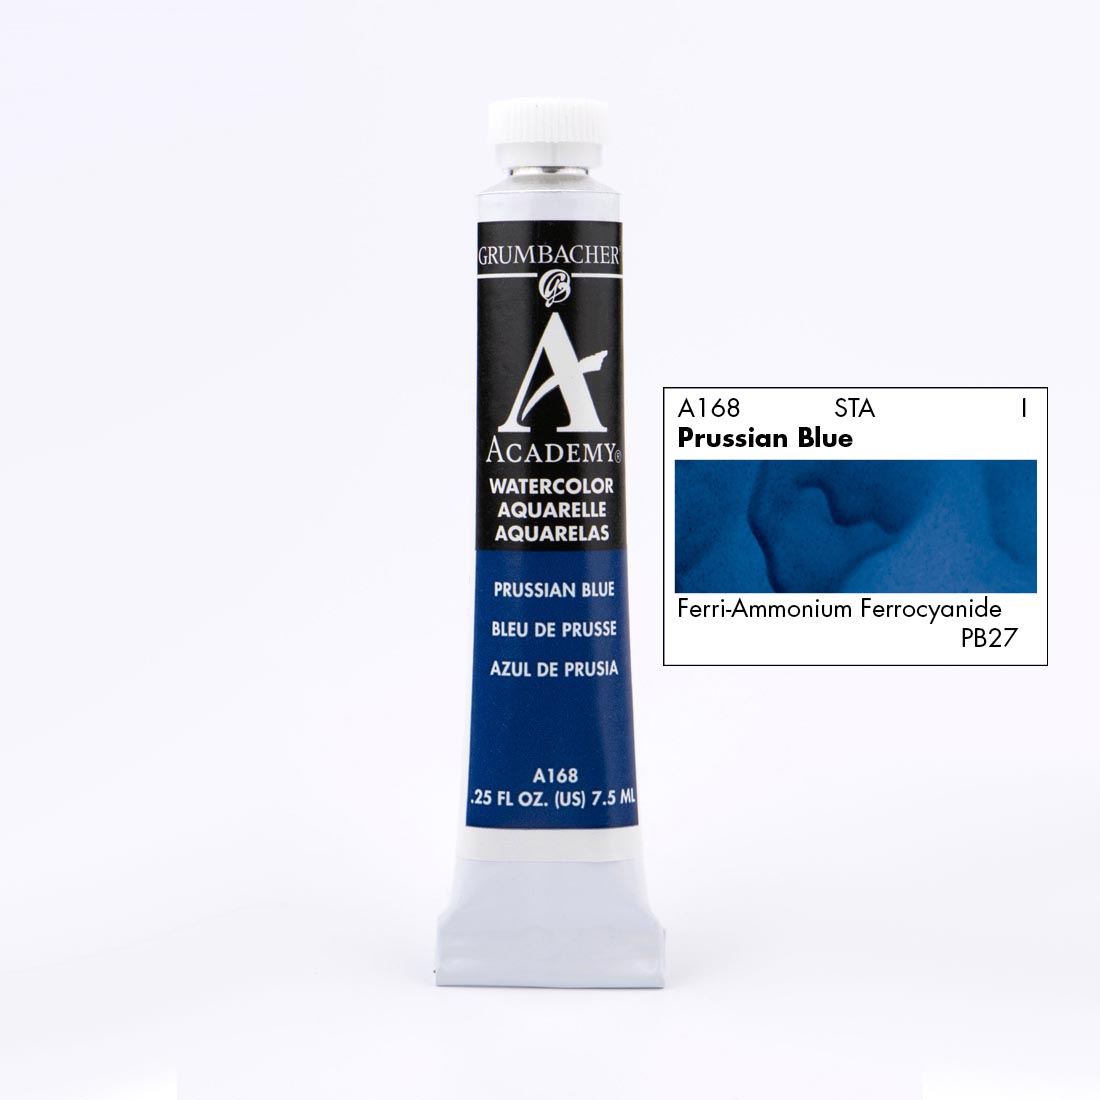 Tube of Grumbacher Academy Watercolor beside Prussian Blue color swatch